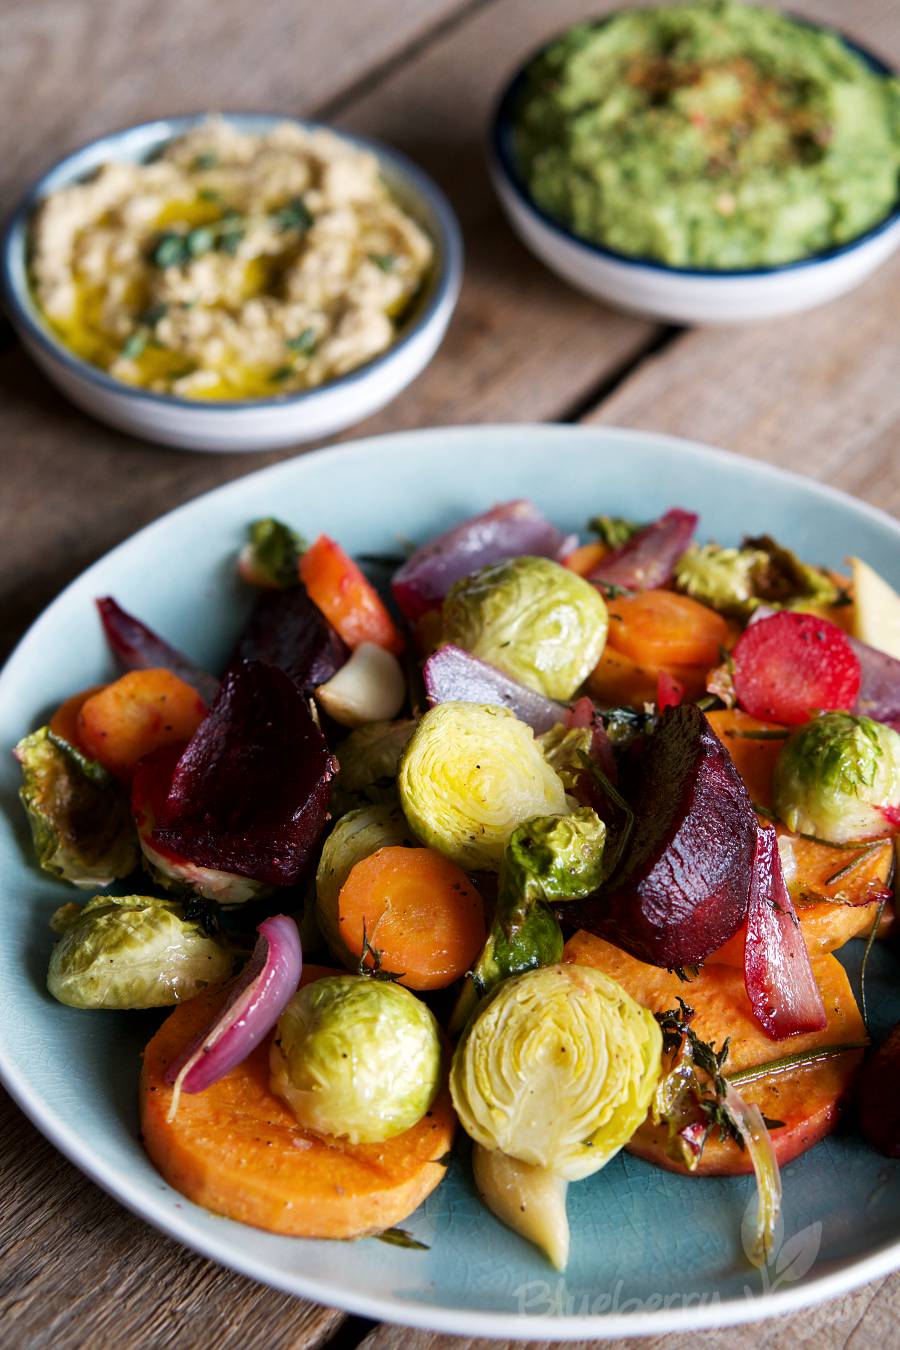 Oven Veggies with two sorts of Hummus